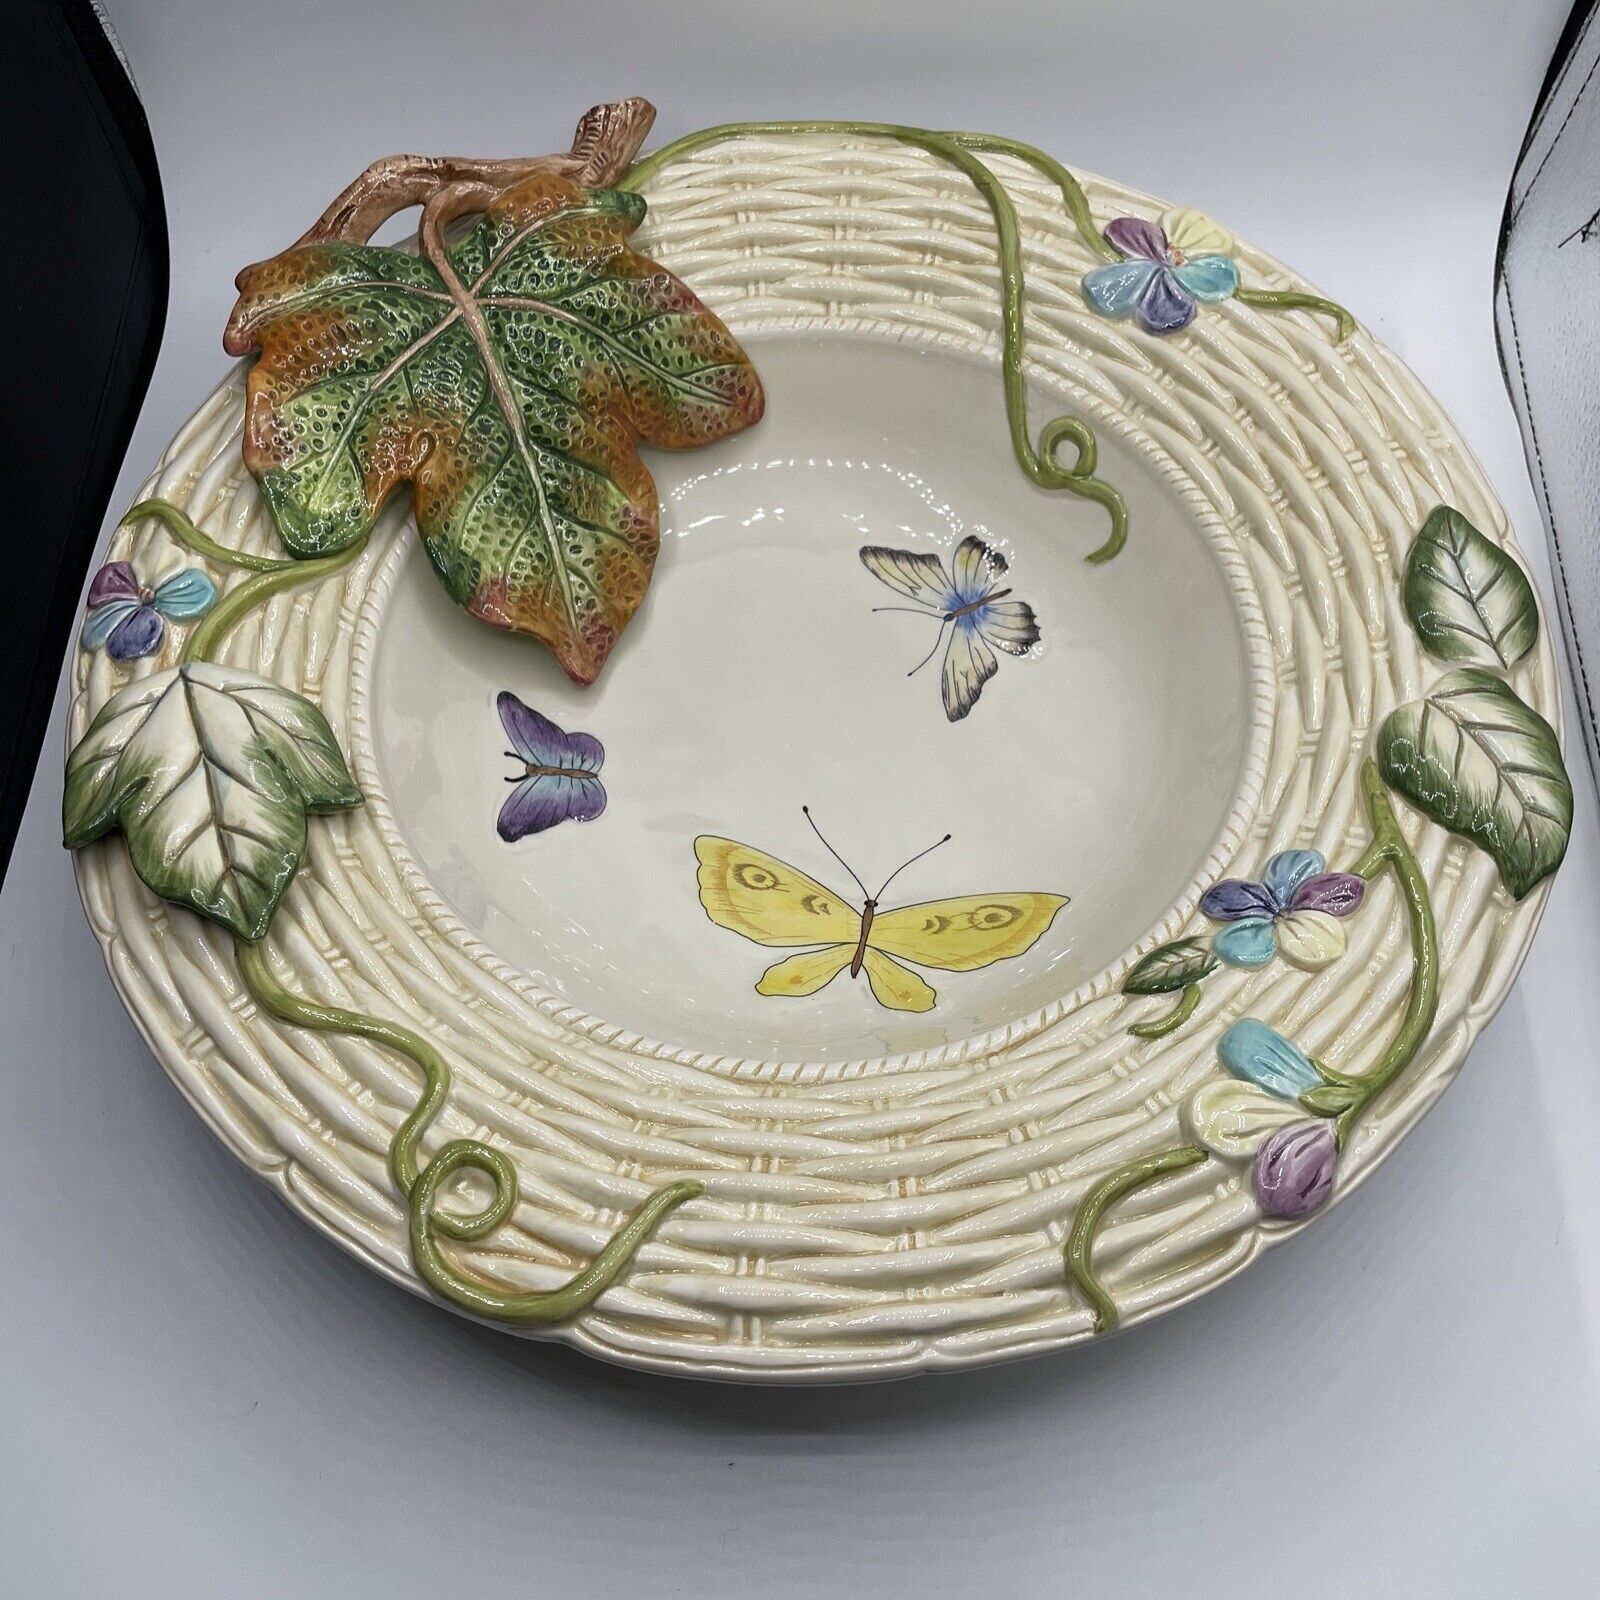 FITZ & FLOYD OLD WORLD RABBITS LARGE 15” BOWL BUTTERFLY LEAVES BASKET WEAVE